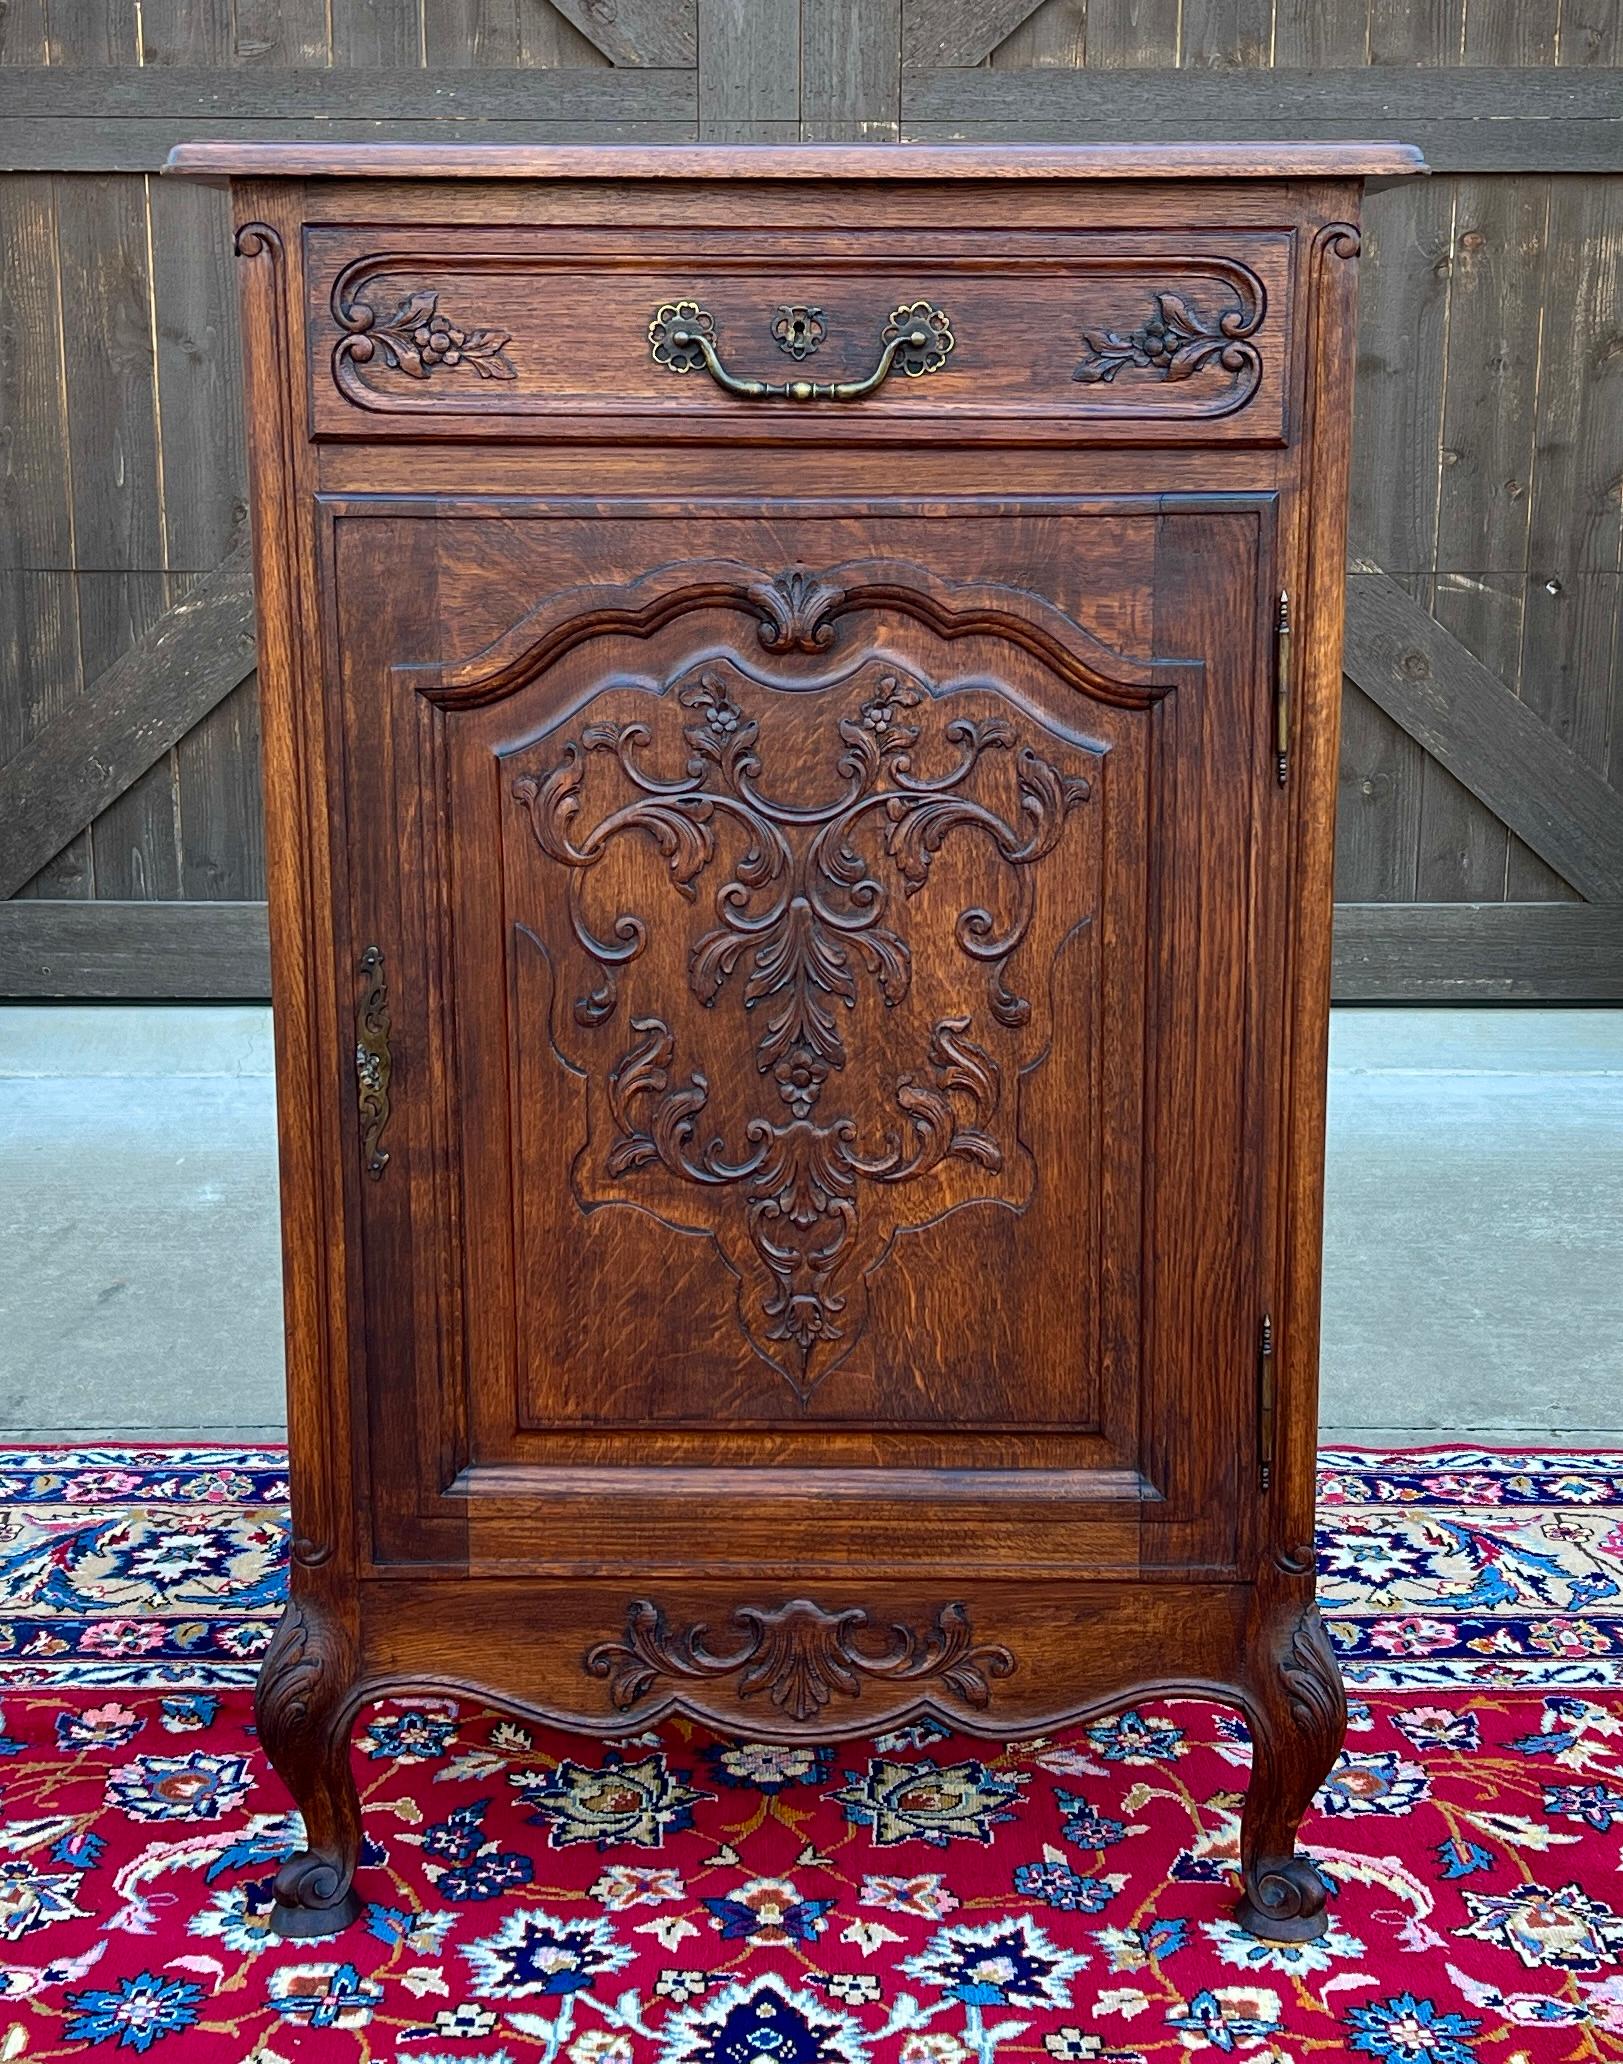     BEAUTIFULLY Carved Antique French Oak Louis XV Style Cabinet Cupboard with Drawer~~c. 1920s

    Perfect statement piece that can accommodate any number of storage needs in today's home~~use in a bedroom or dressing area for linen or jewelry~~in